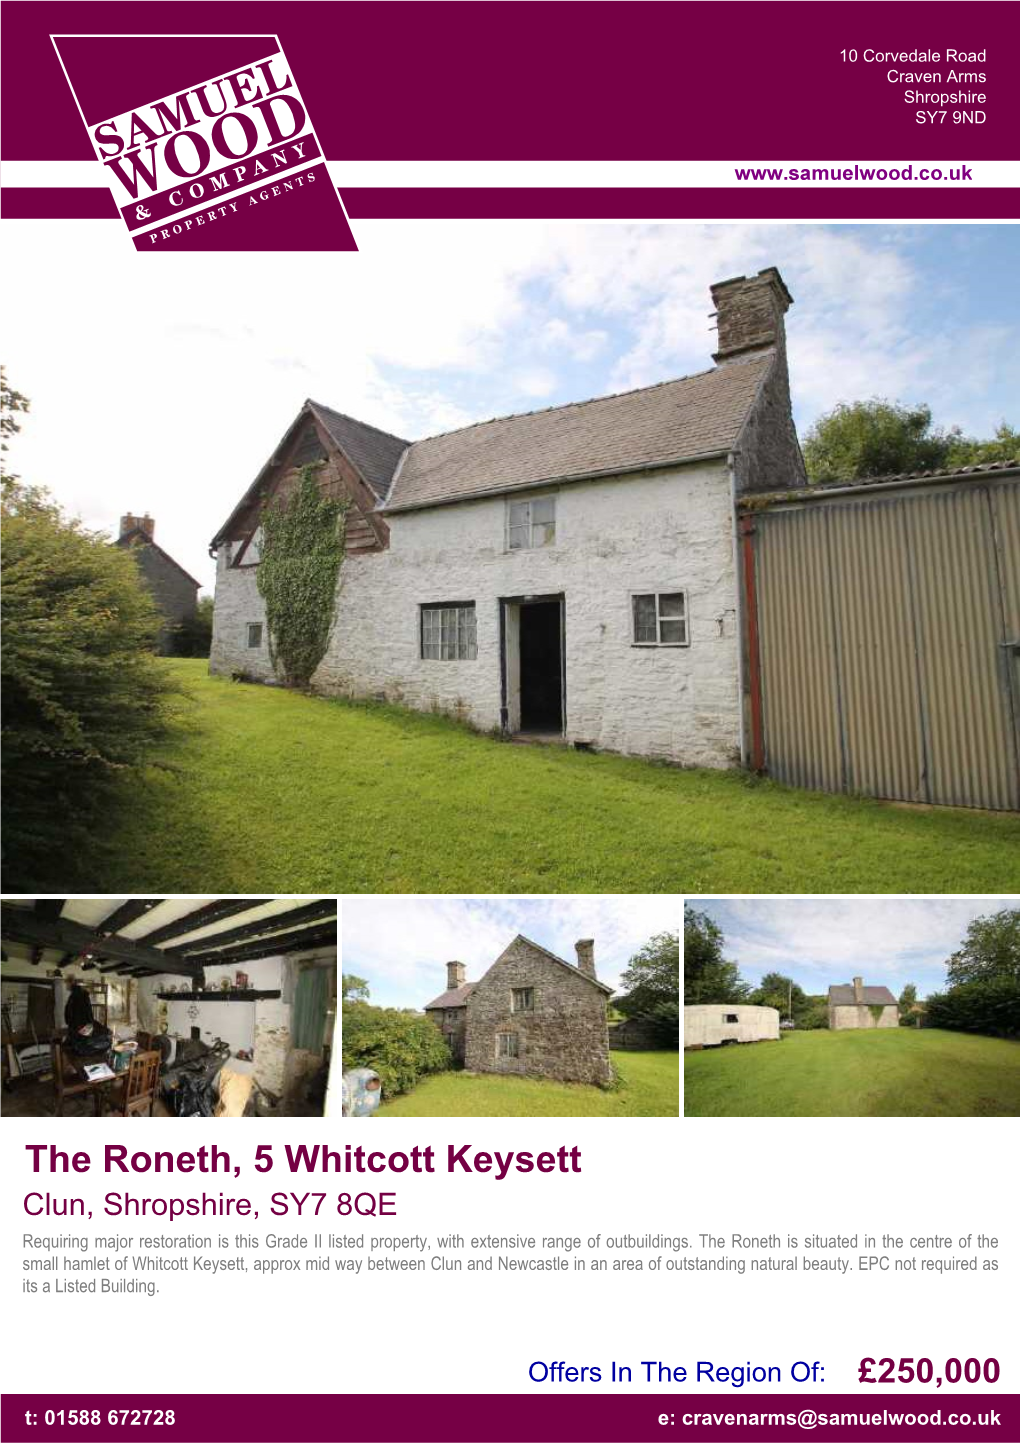 The Roneth, 5 Whitcott Keysett Clun, Shropshire, SY7 8QE Requiring Major Restoration Is This Grade II Listed Property, with Extensive Range of Outbuildings